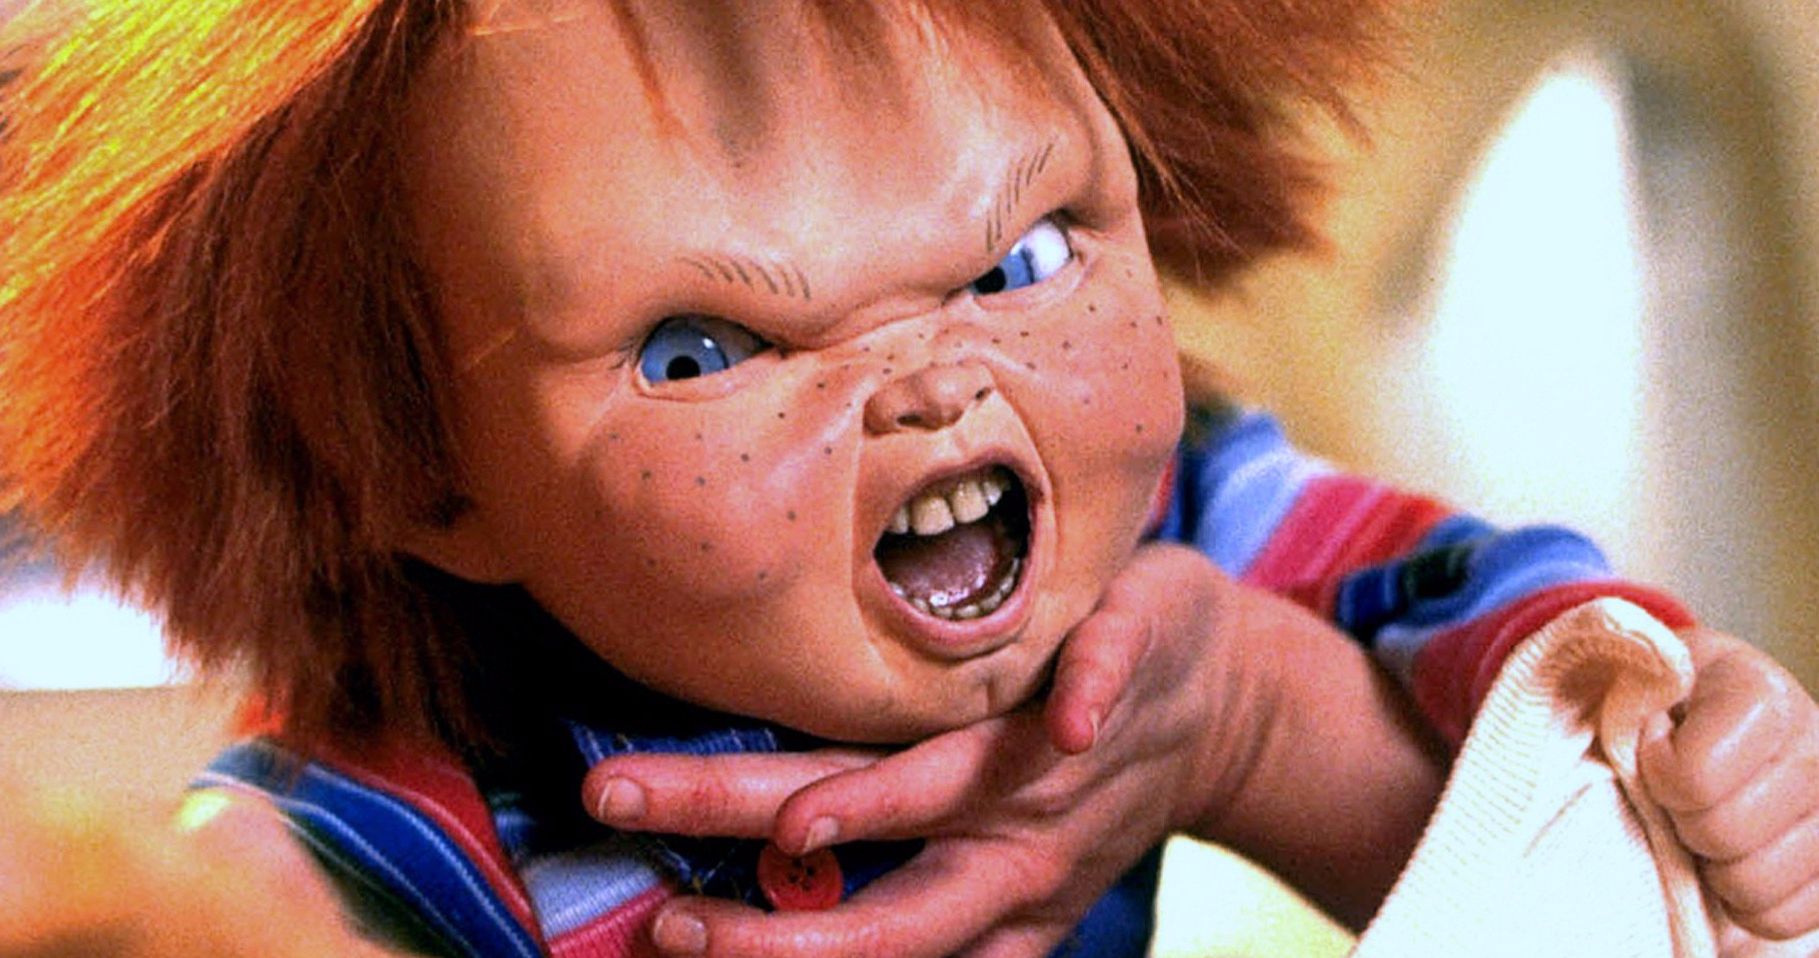 Child's Play TV Show Chucky Goes Straight-to-Series at SYFY